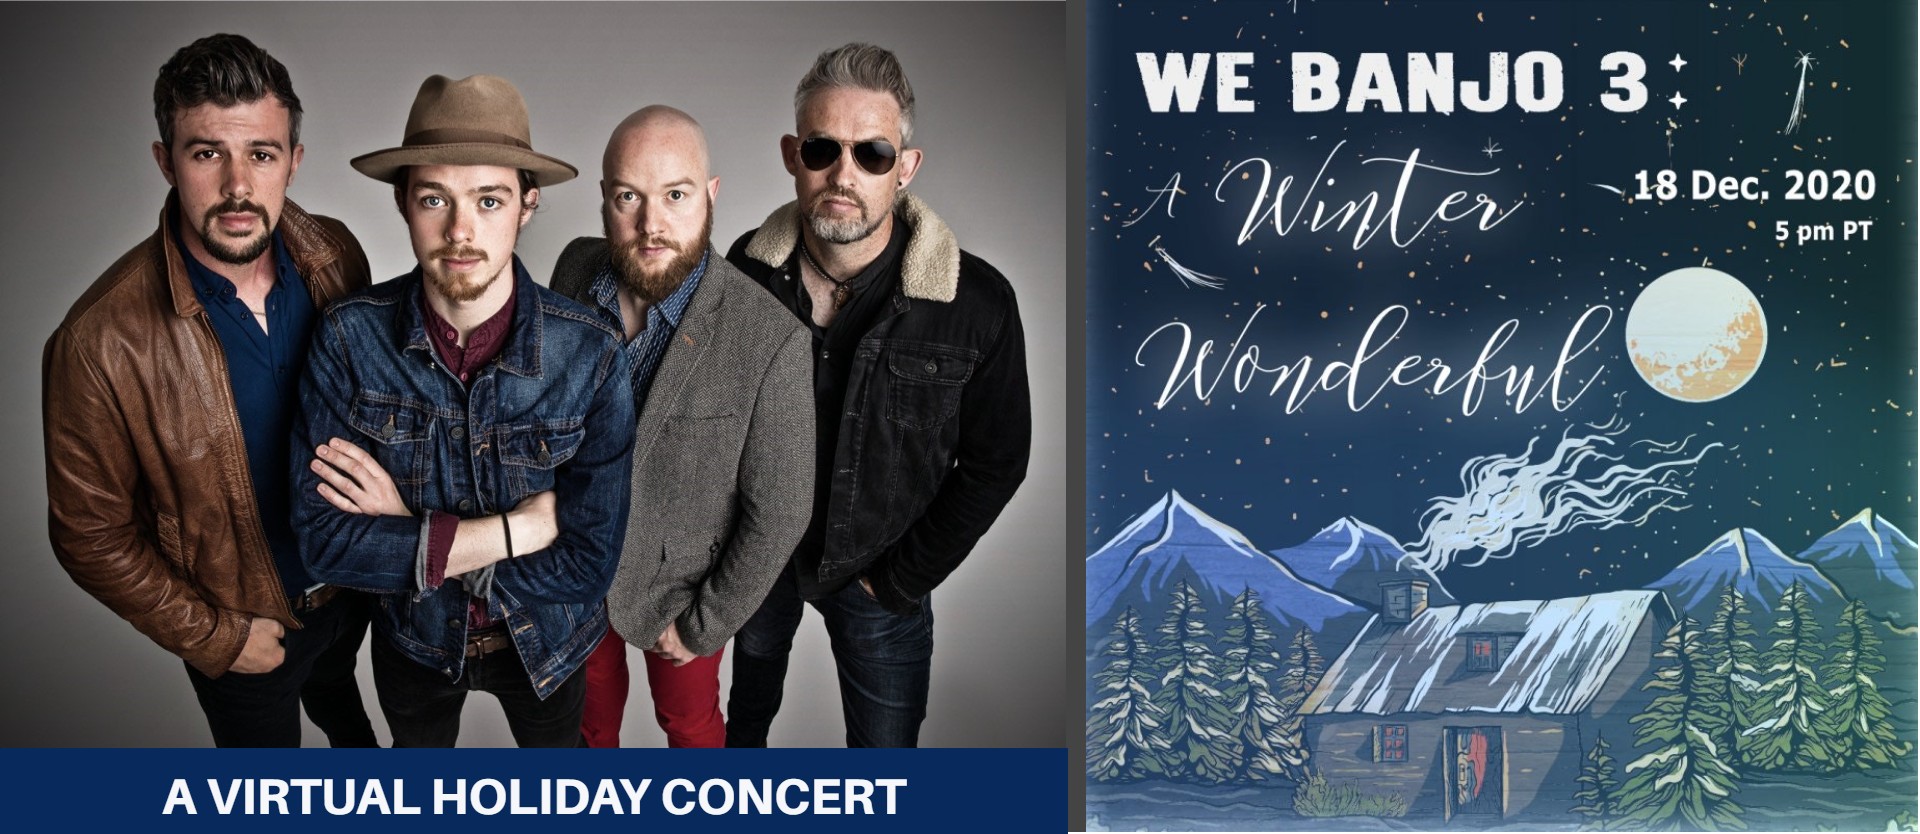 A Winter Wonderful - Livestream Holiday Concert with We Banjo 3 & Special Guests